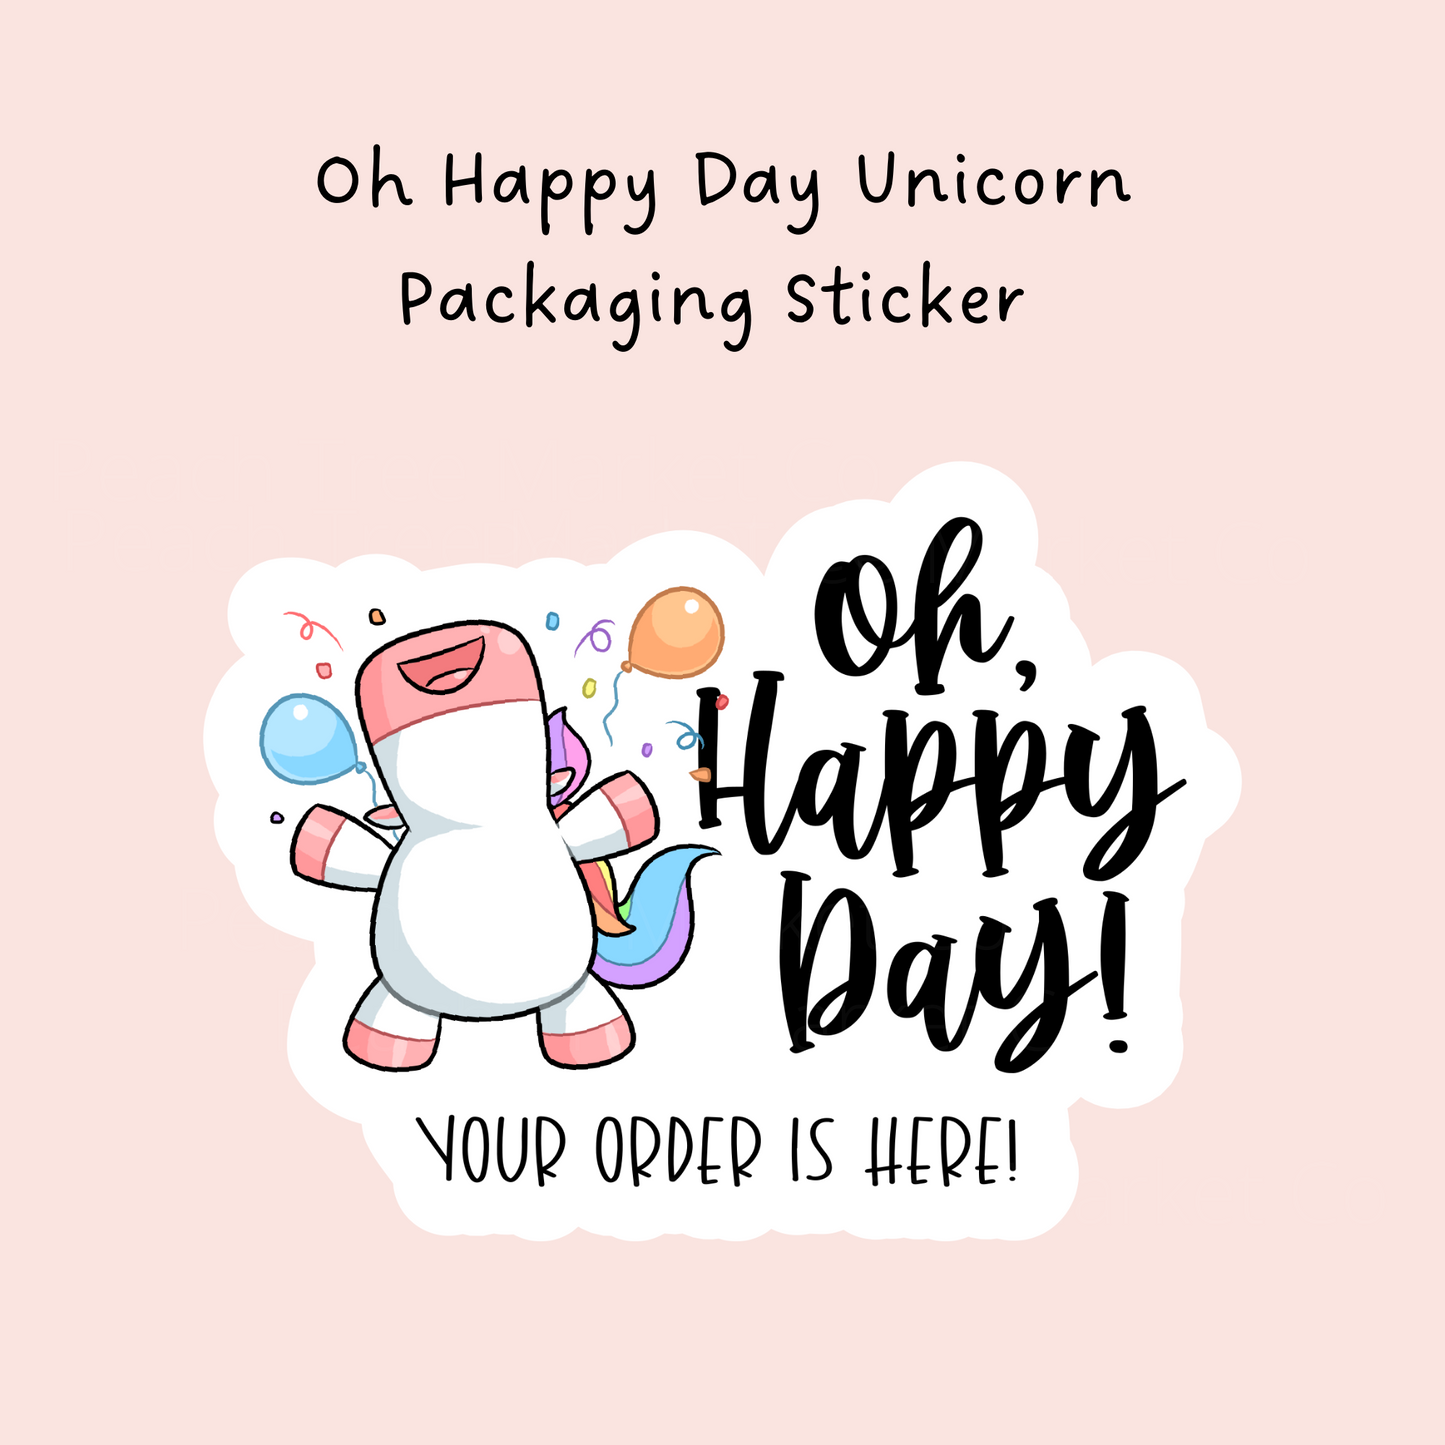 Oh Happy Day Unicorn Packaging Sticker